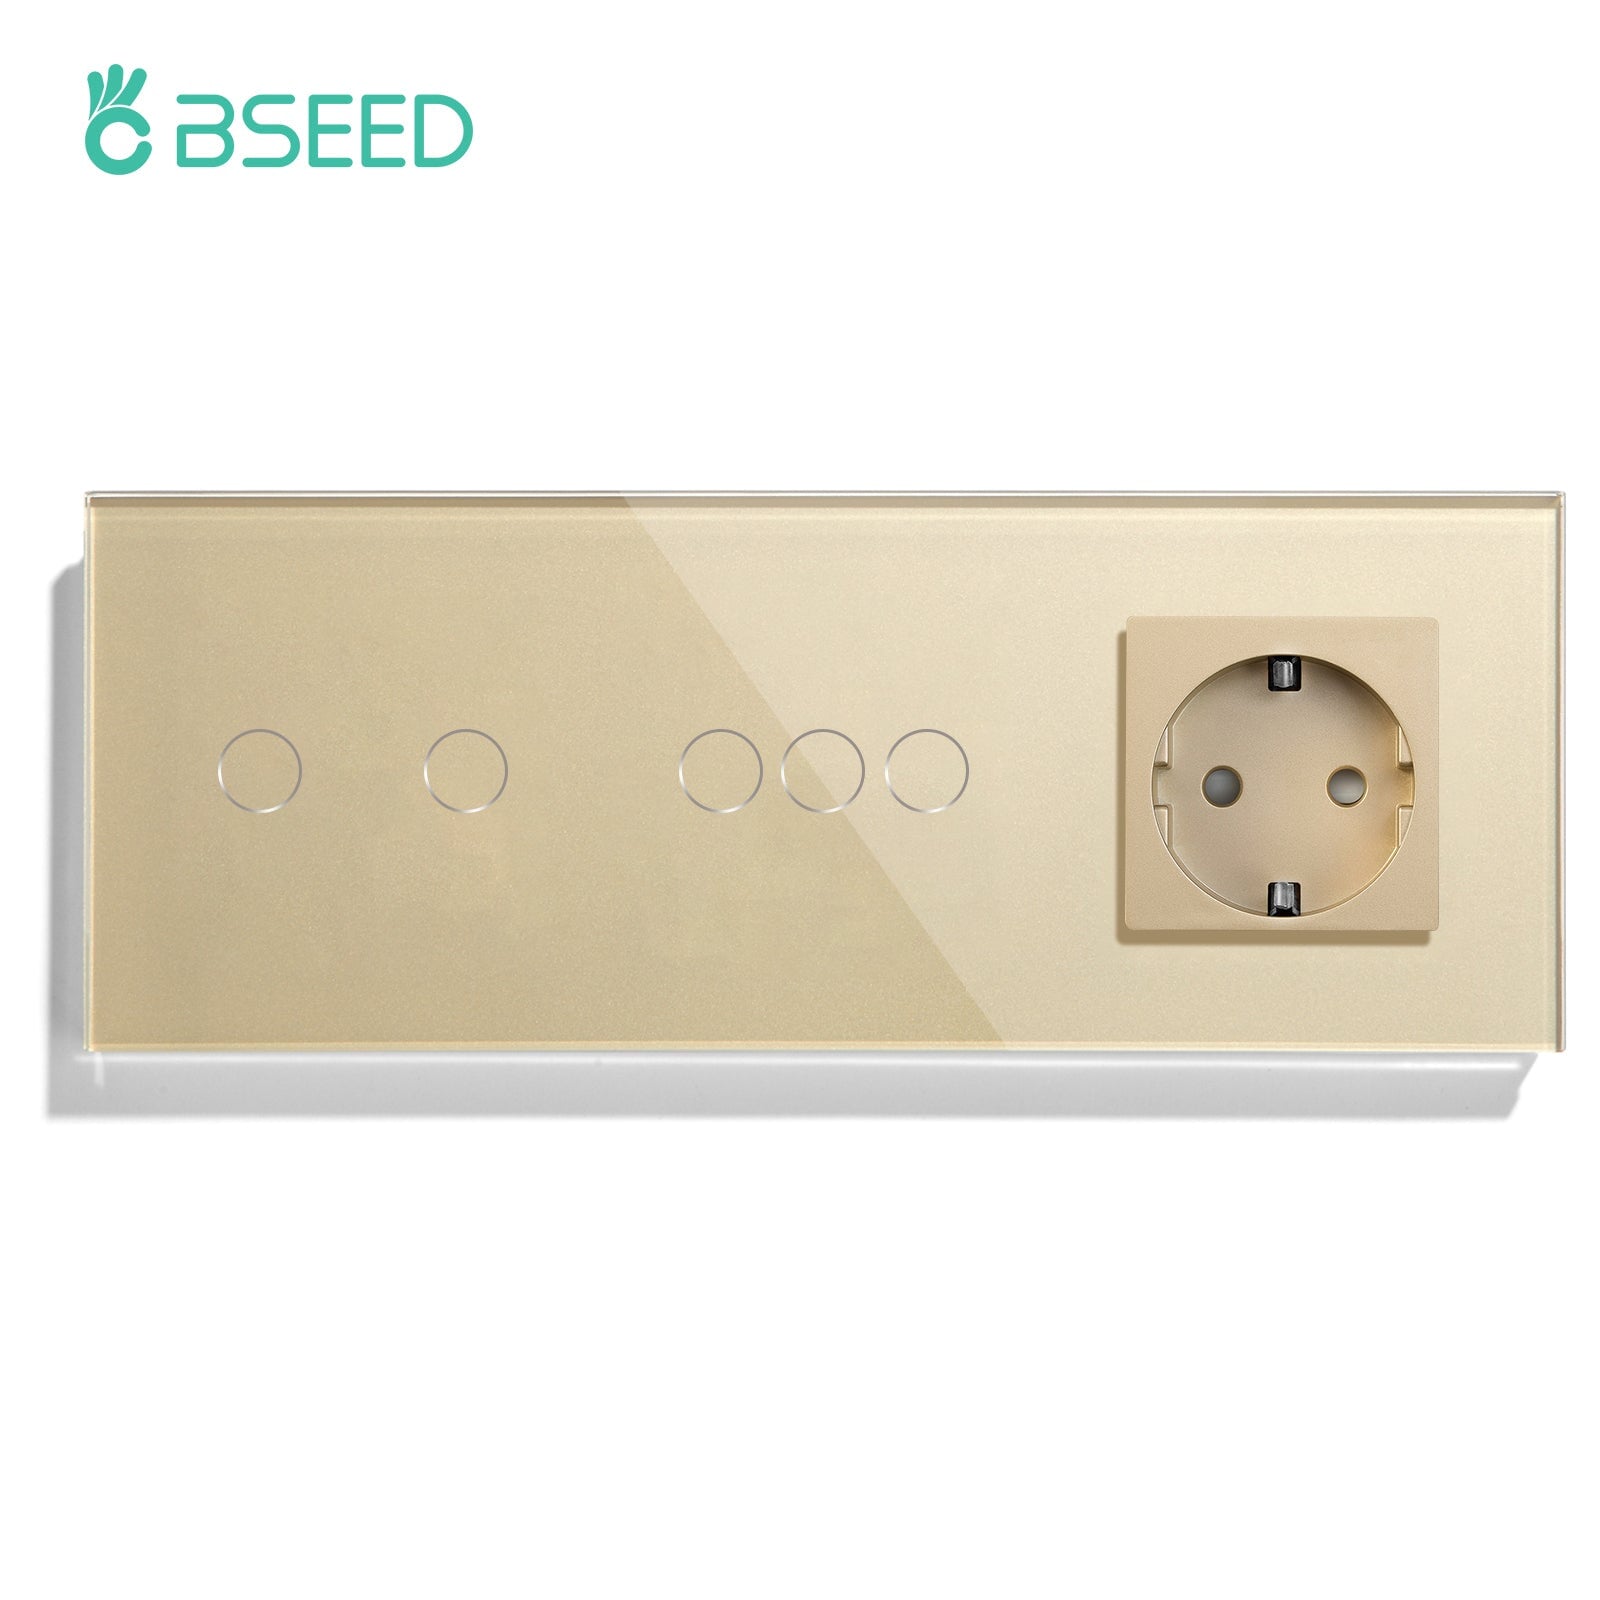 BSEED Double Touch 1/2/3 Gnag 1/2/3 Way Light Switch With EU Socket Power Outlets & Sockets Bseedswitch Golden 2gang+3gang 1Way